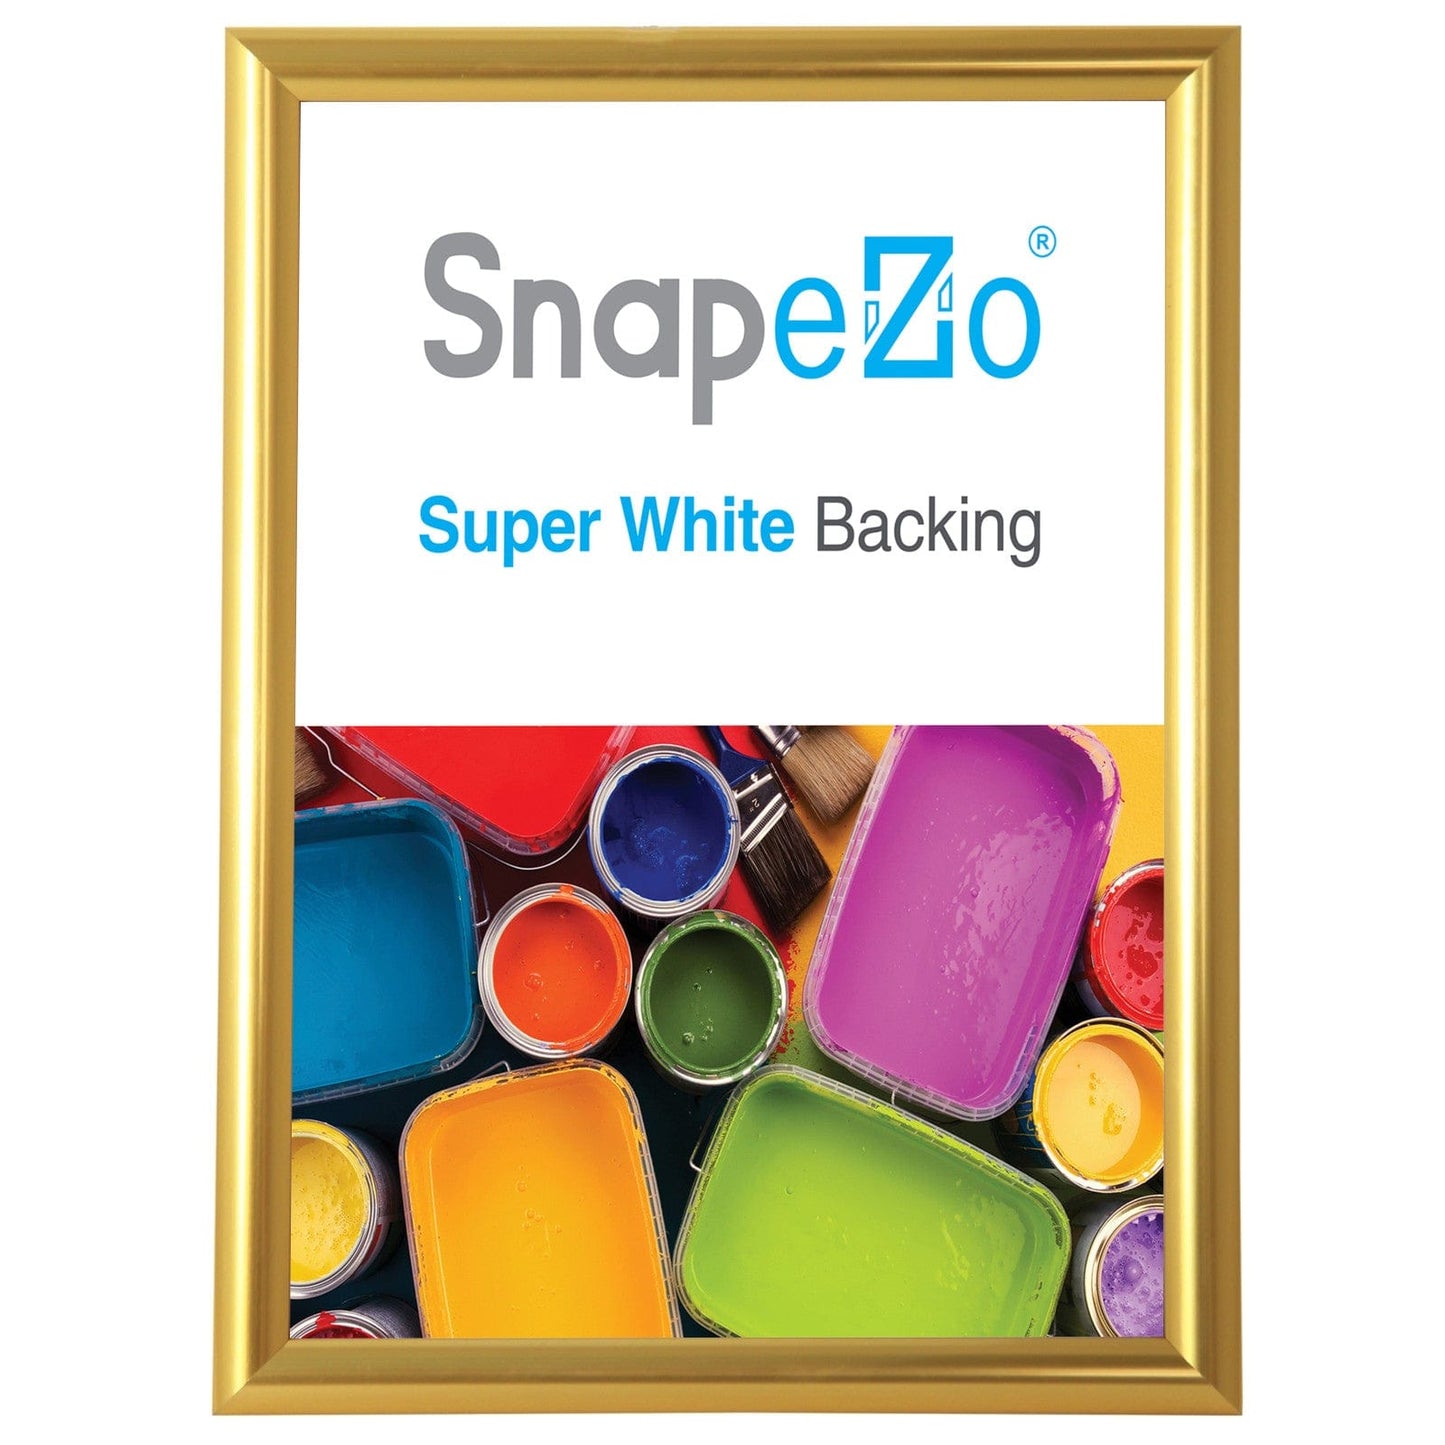 18x24 Gold Effect Poster Frame 1 Inch SnapeZo® - Snap Frames Direct